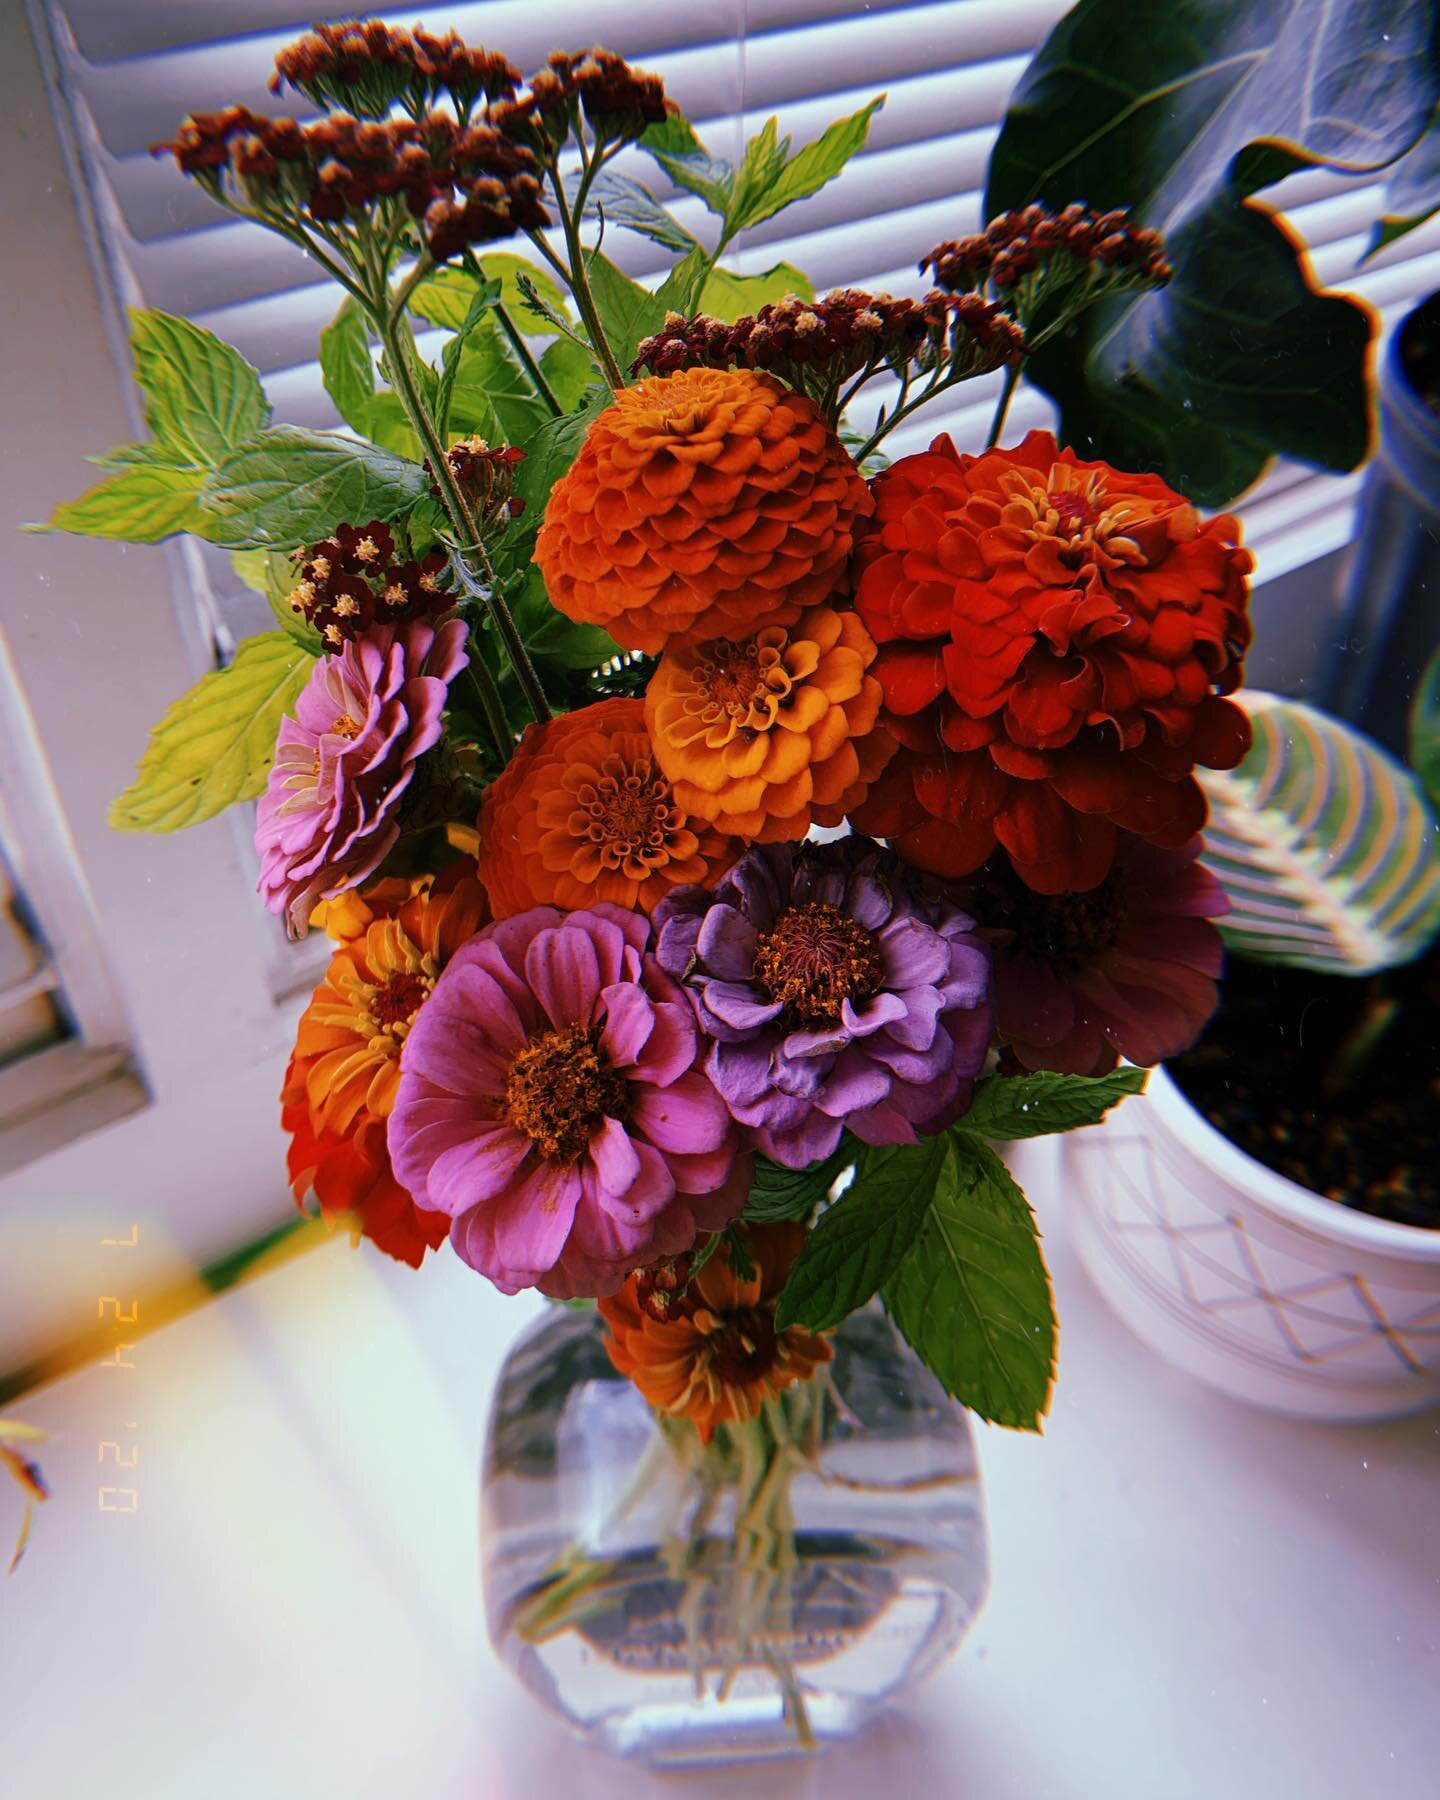 Blooms from the quarantine seed packets of yore showing up as a reminder that what you invest in and take care of is what will have a chance to survive. That goes for everything&mdash;allyship, friendships, election season, the USPS, your mental heal